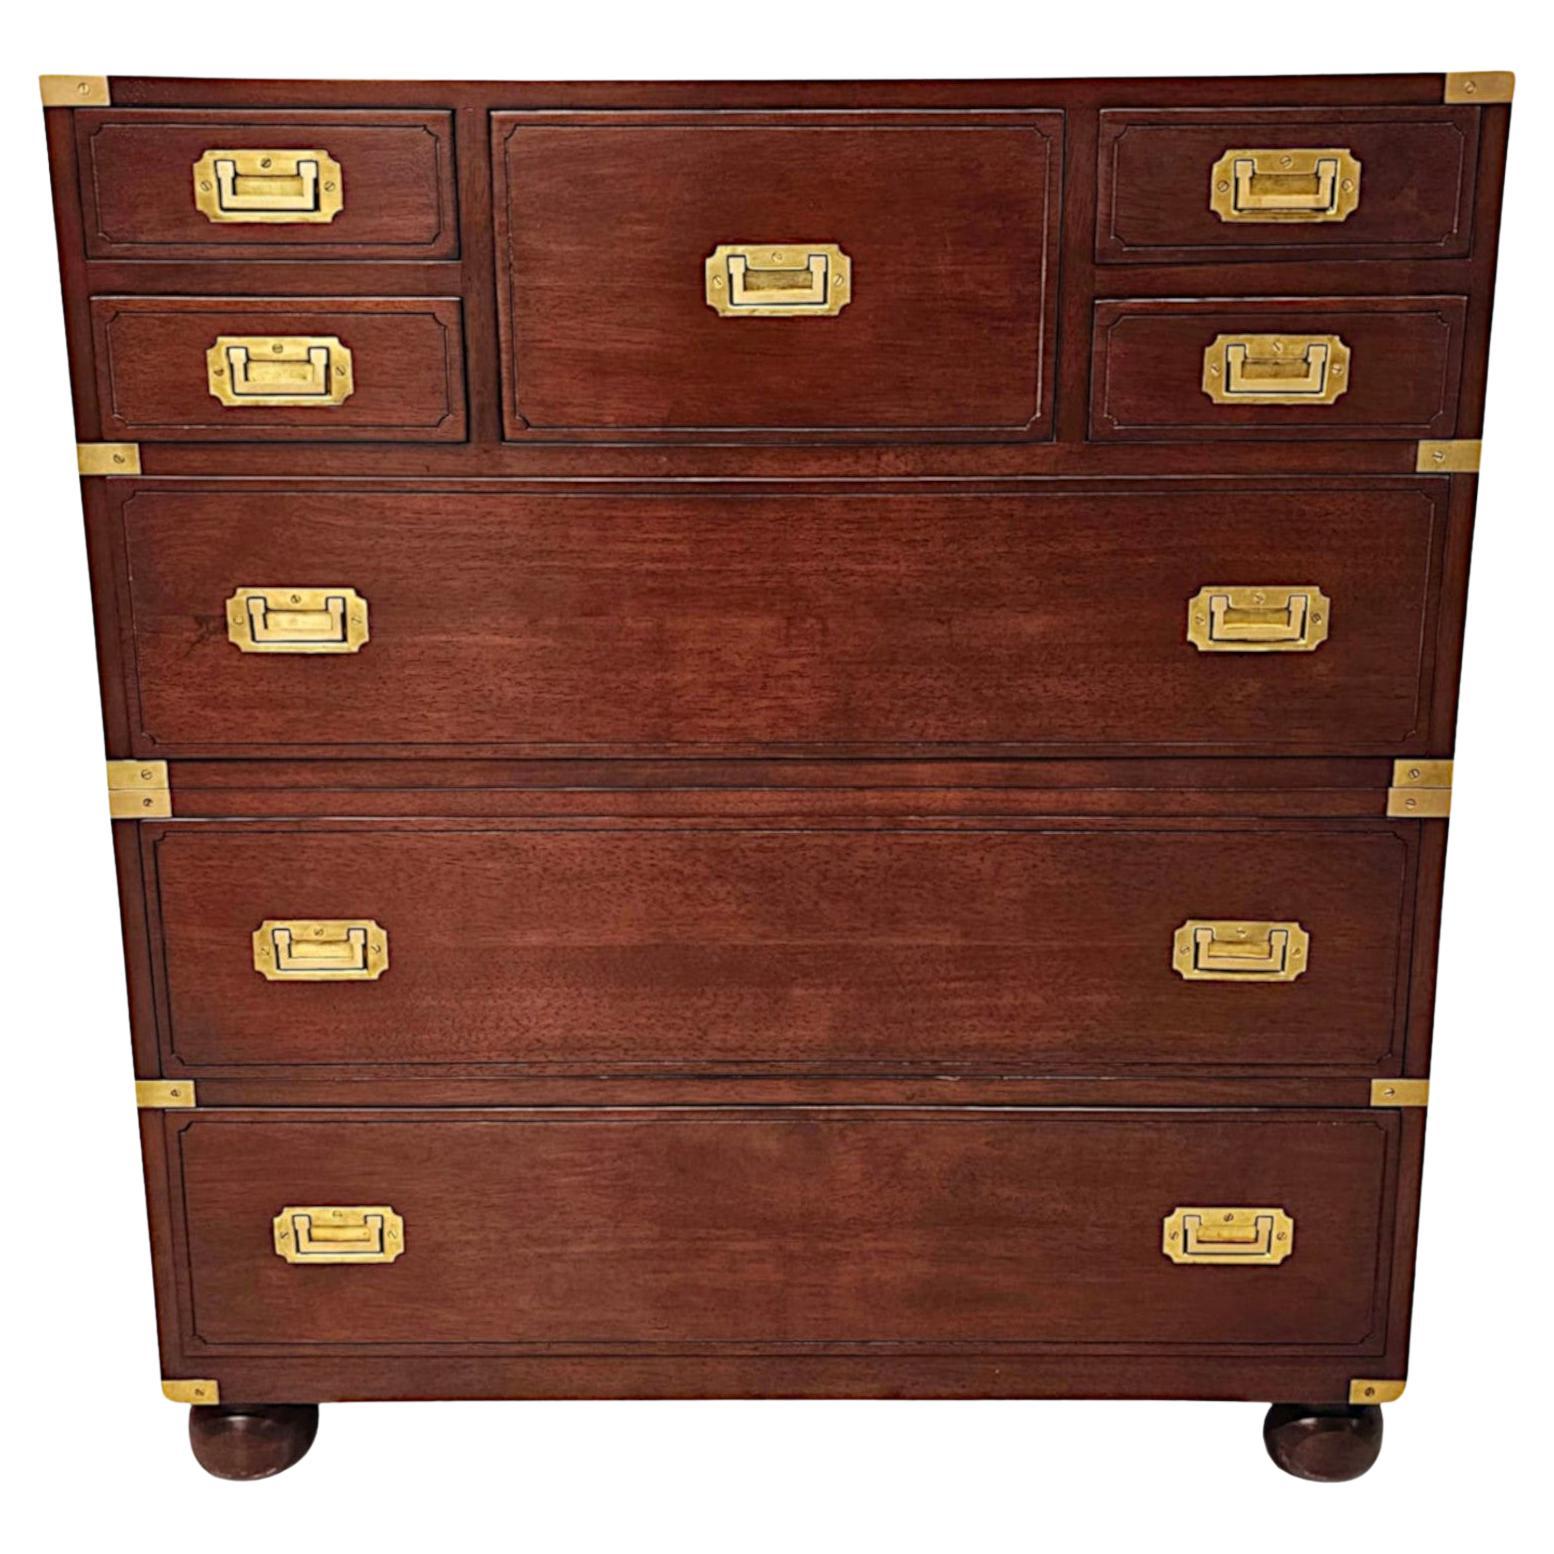 A Fabulous Chest of Drawers in the Campaign Style